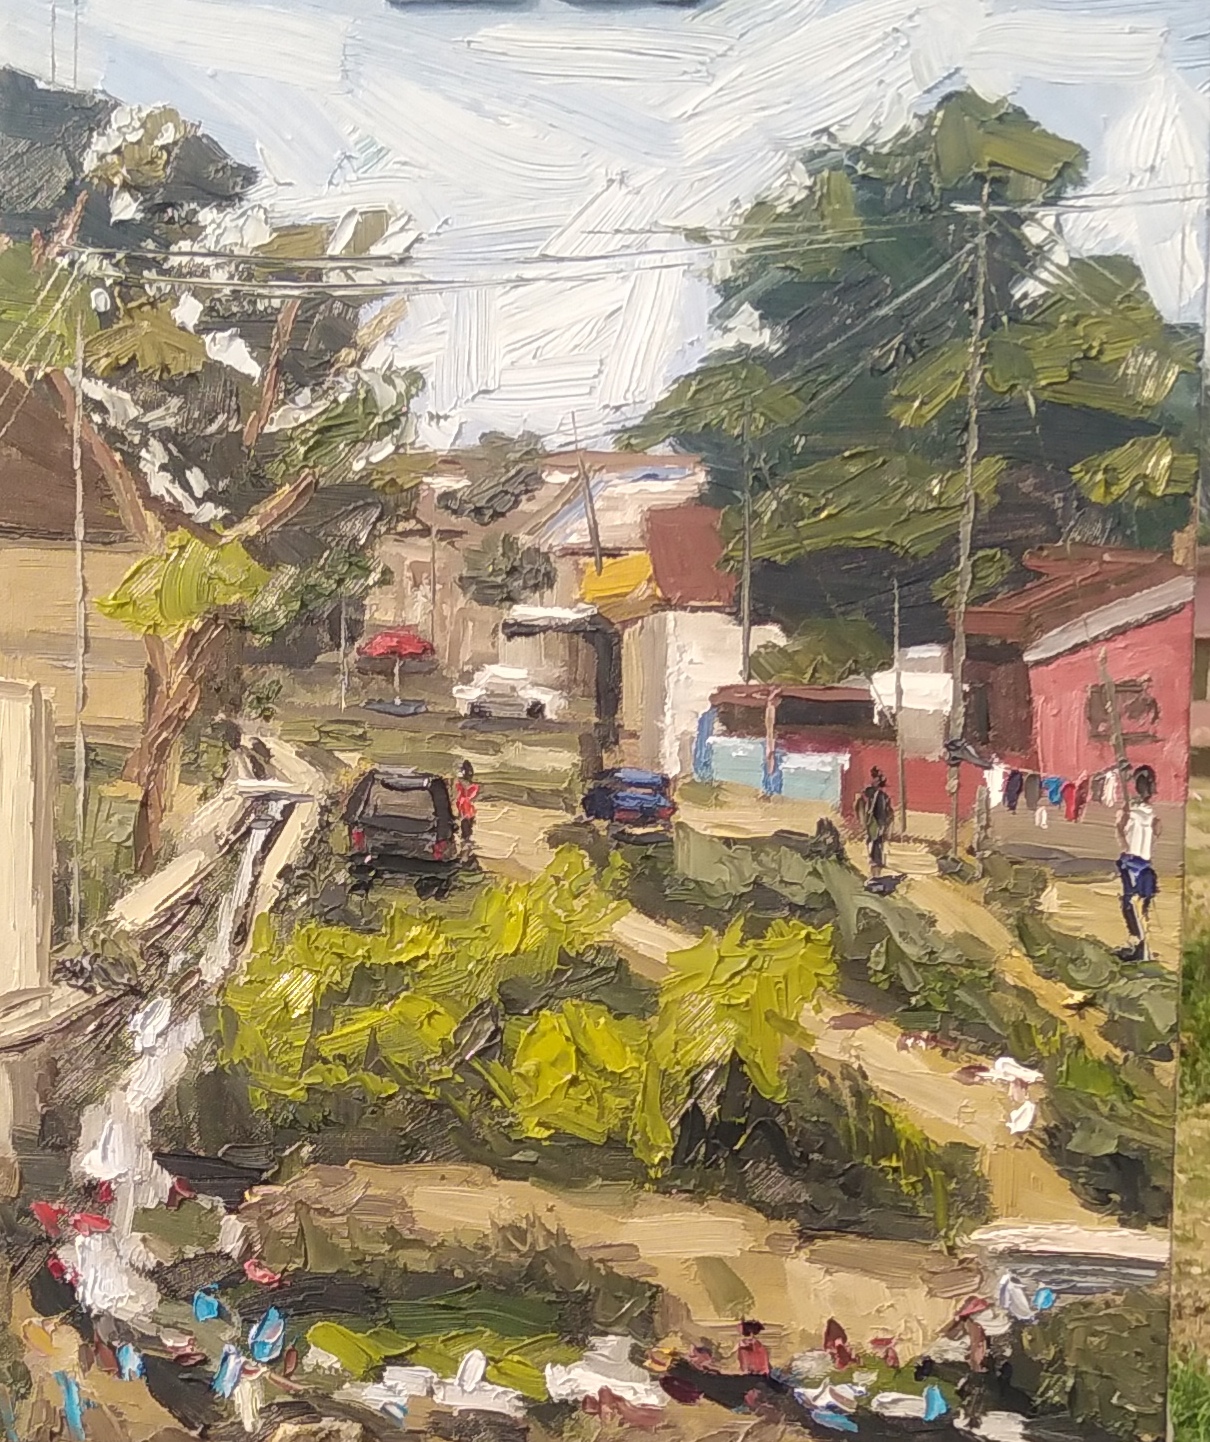 Edak Young, "The Street," oil on canvas, 13 x 16 in.